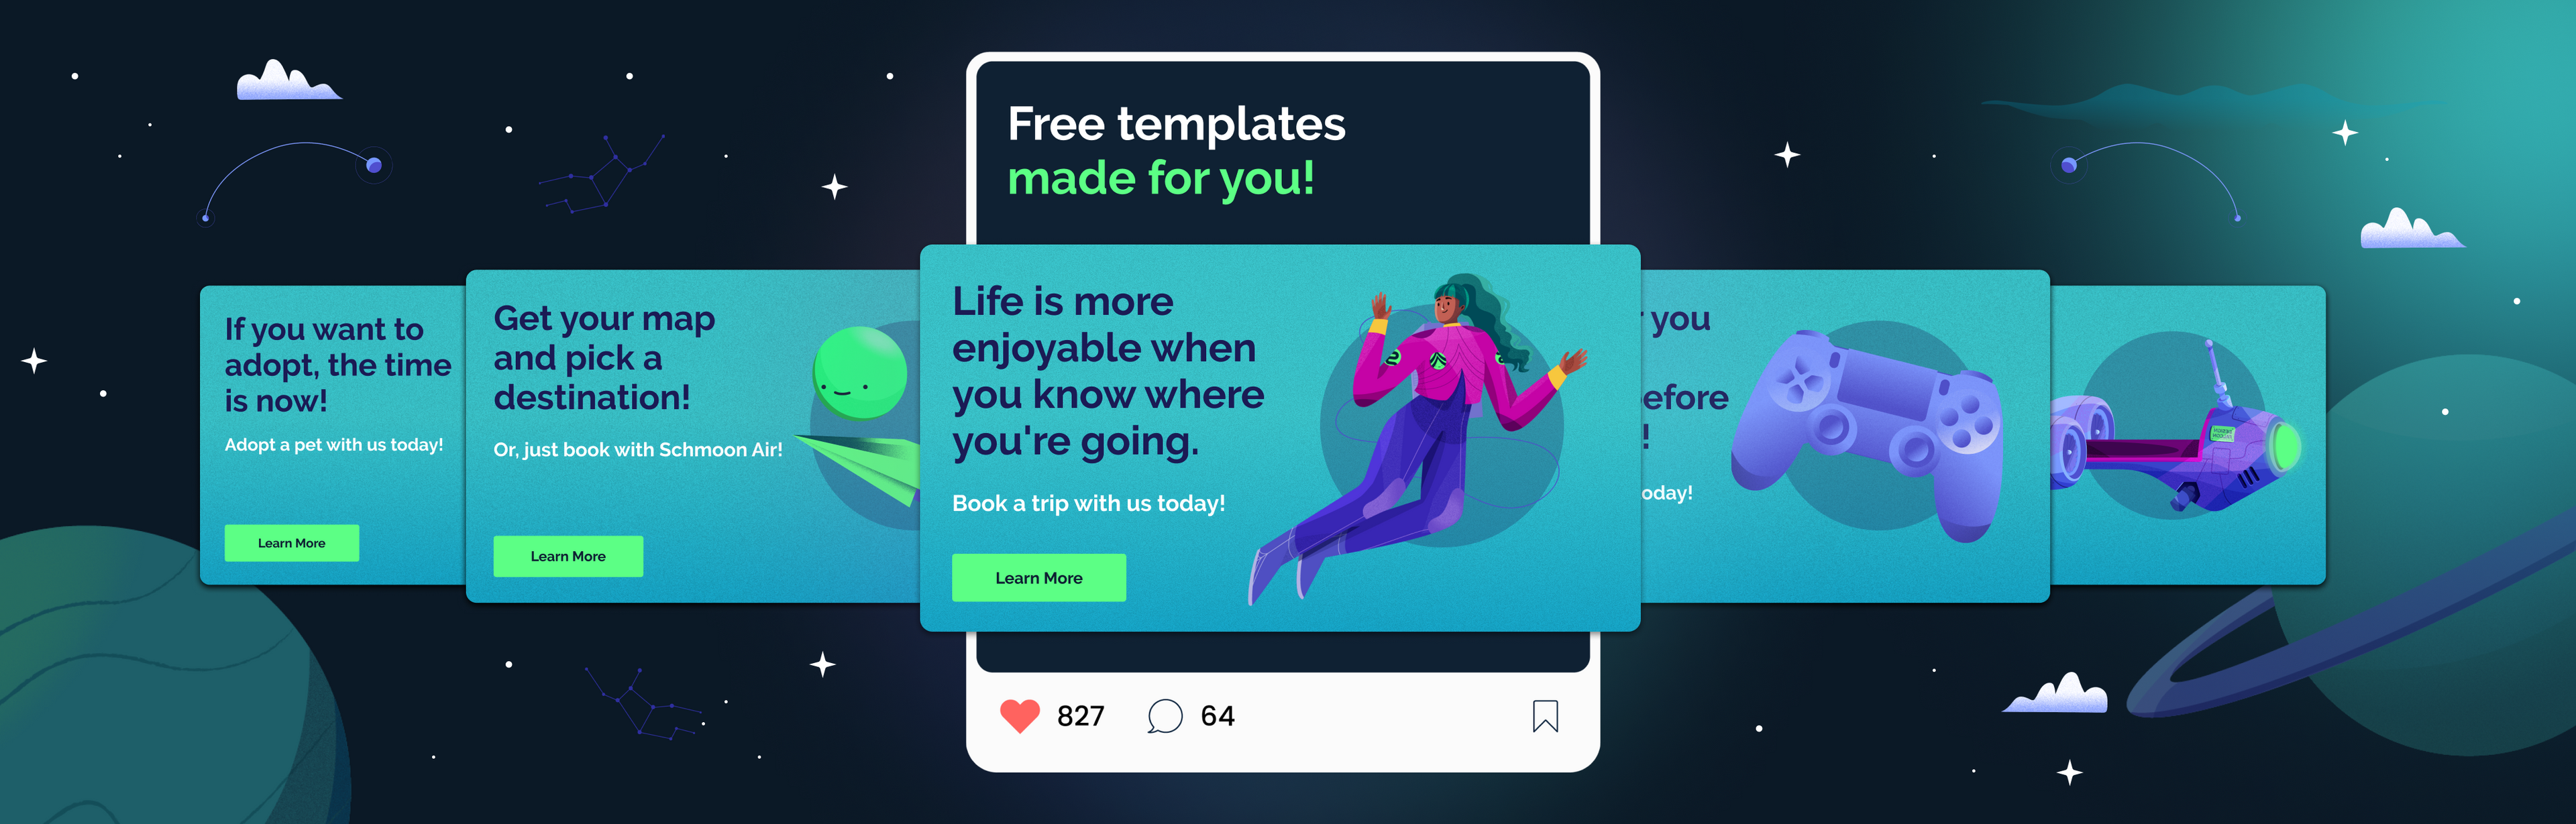 15 Free Ad Templates To Save You Time (And Money)